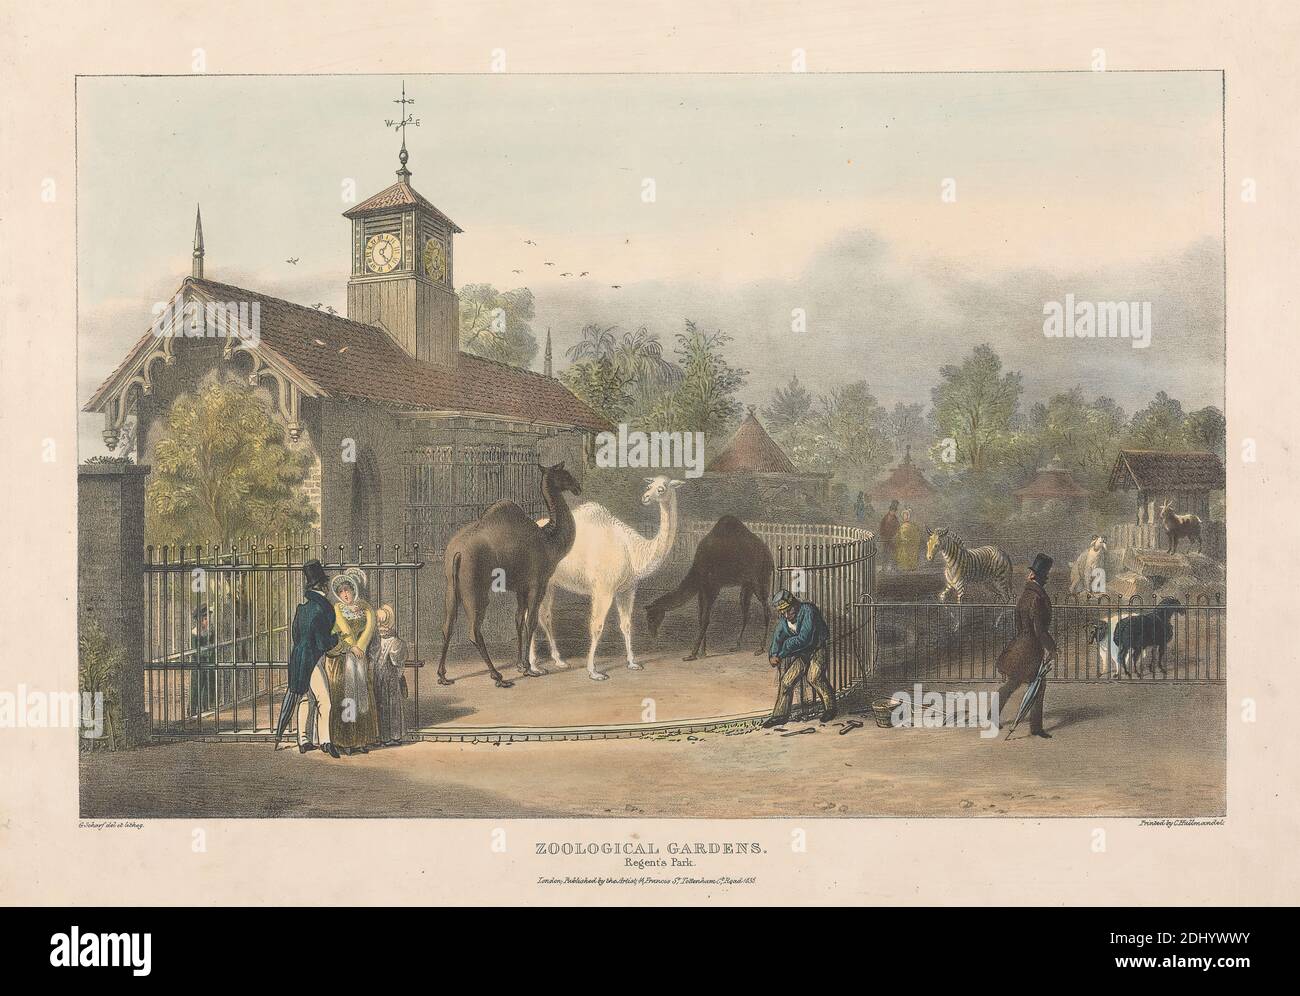 Zoological Gardens, Regent's Park, George Johann Scharf, 1788–1860,  British, after George Johann Scharf, 1788–1860, British, 1835, Hand colored  lithograph Stock Photo - Alamy